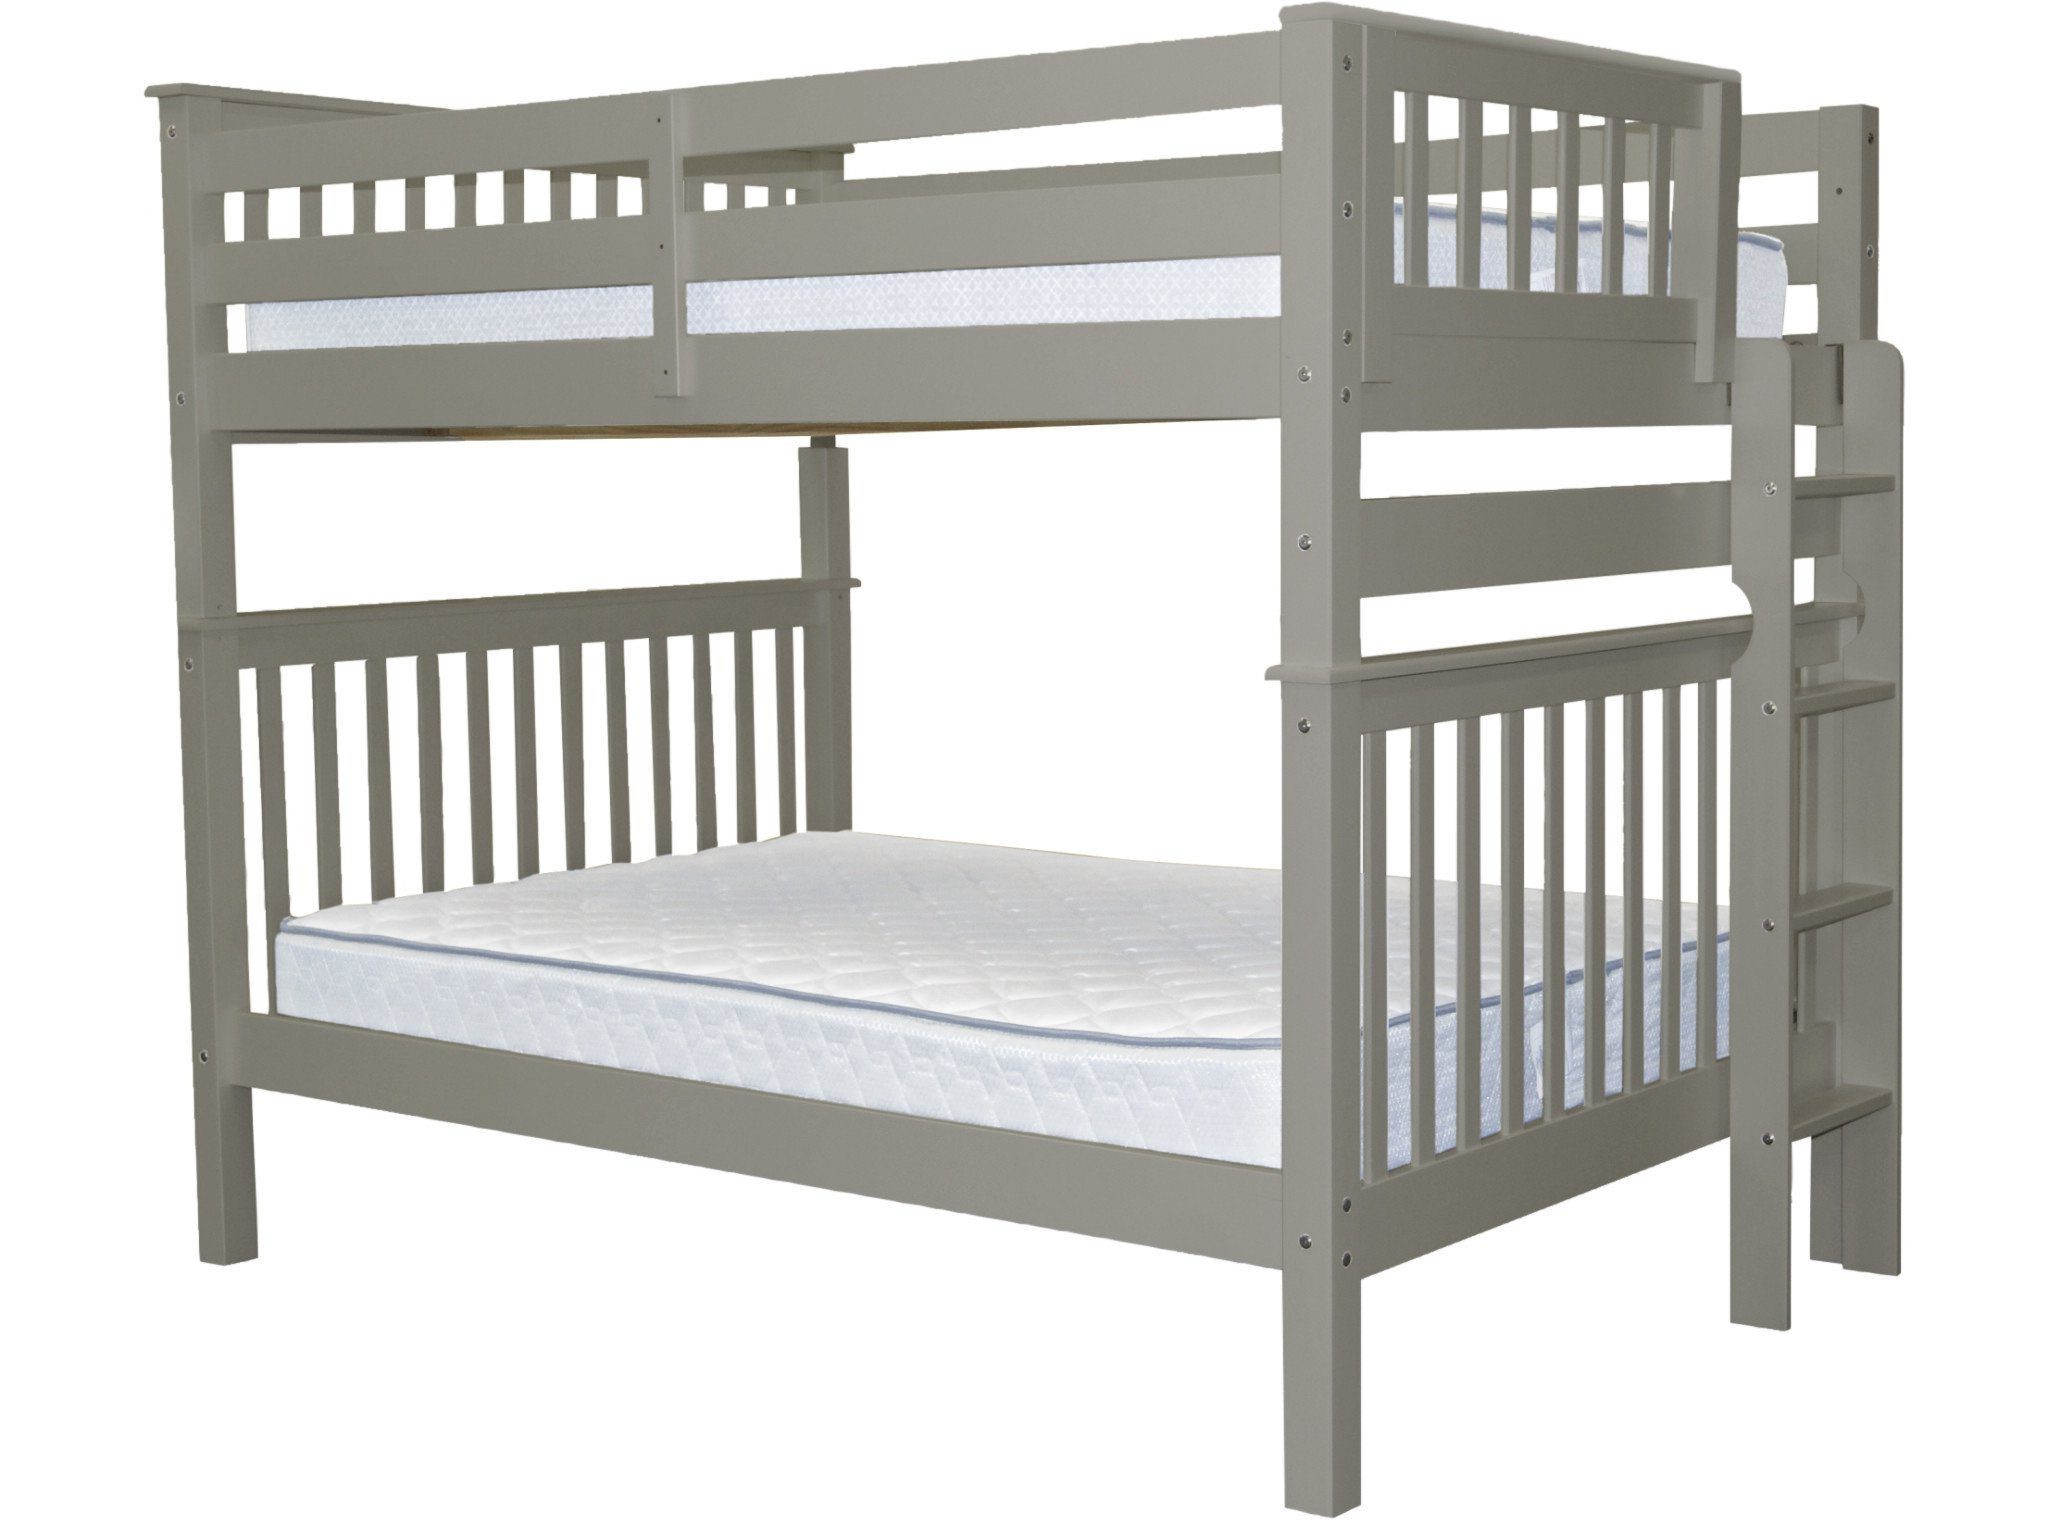 Bunk Bed King Mission Style Bunk Bed Full over Full with End Ladder, Gray